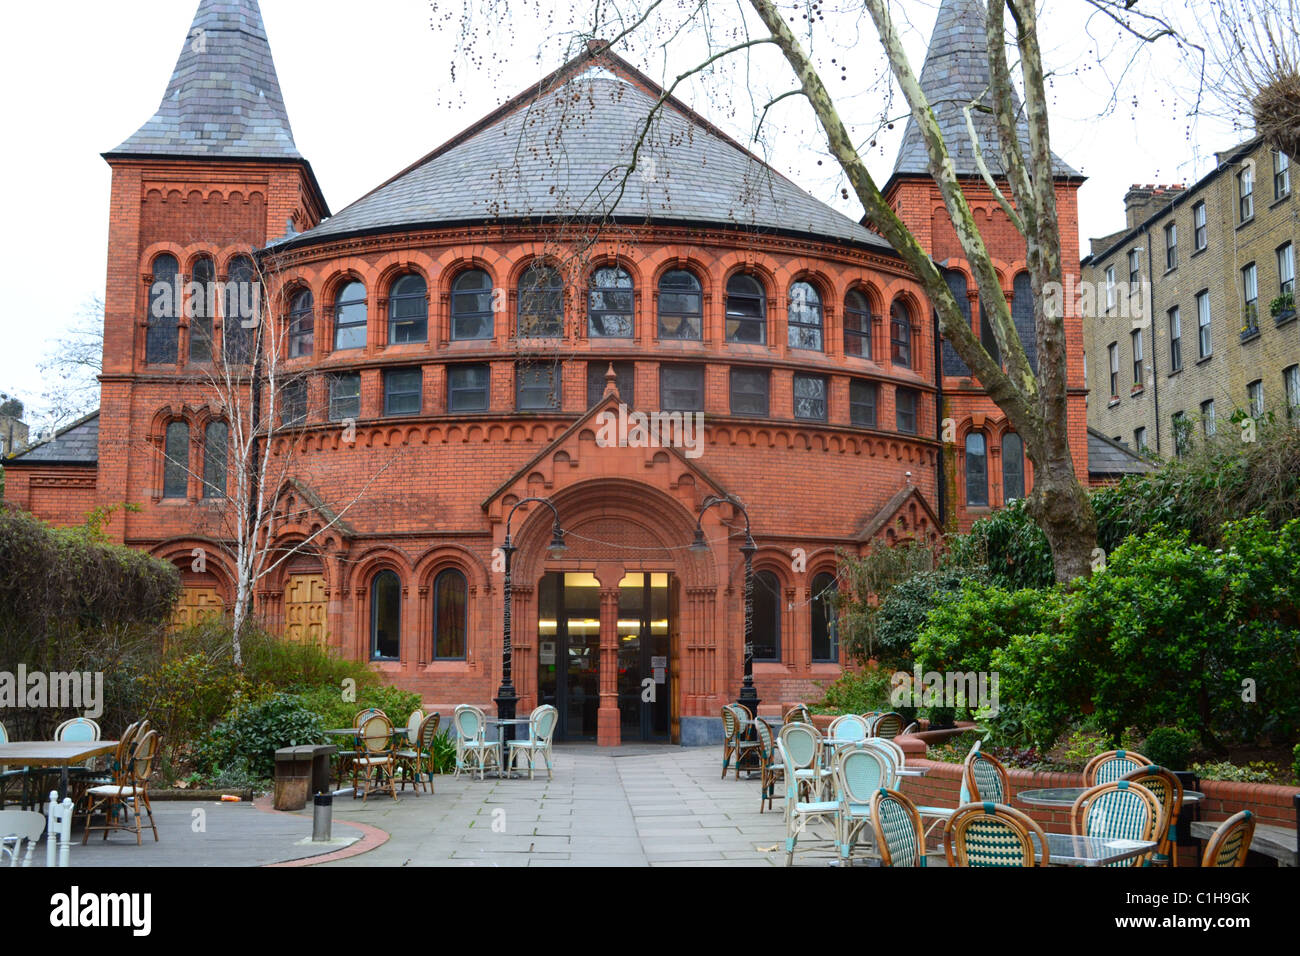 Cafe in former religious building in Notting Hill, London ARTIFEX LUCIS Stock Photo